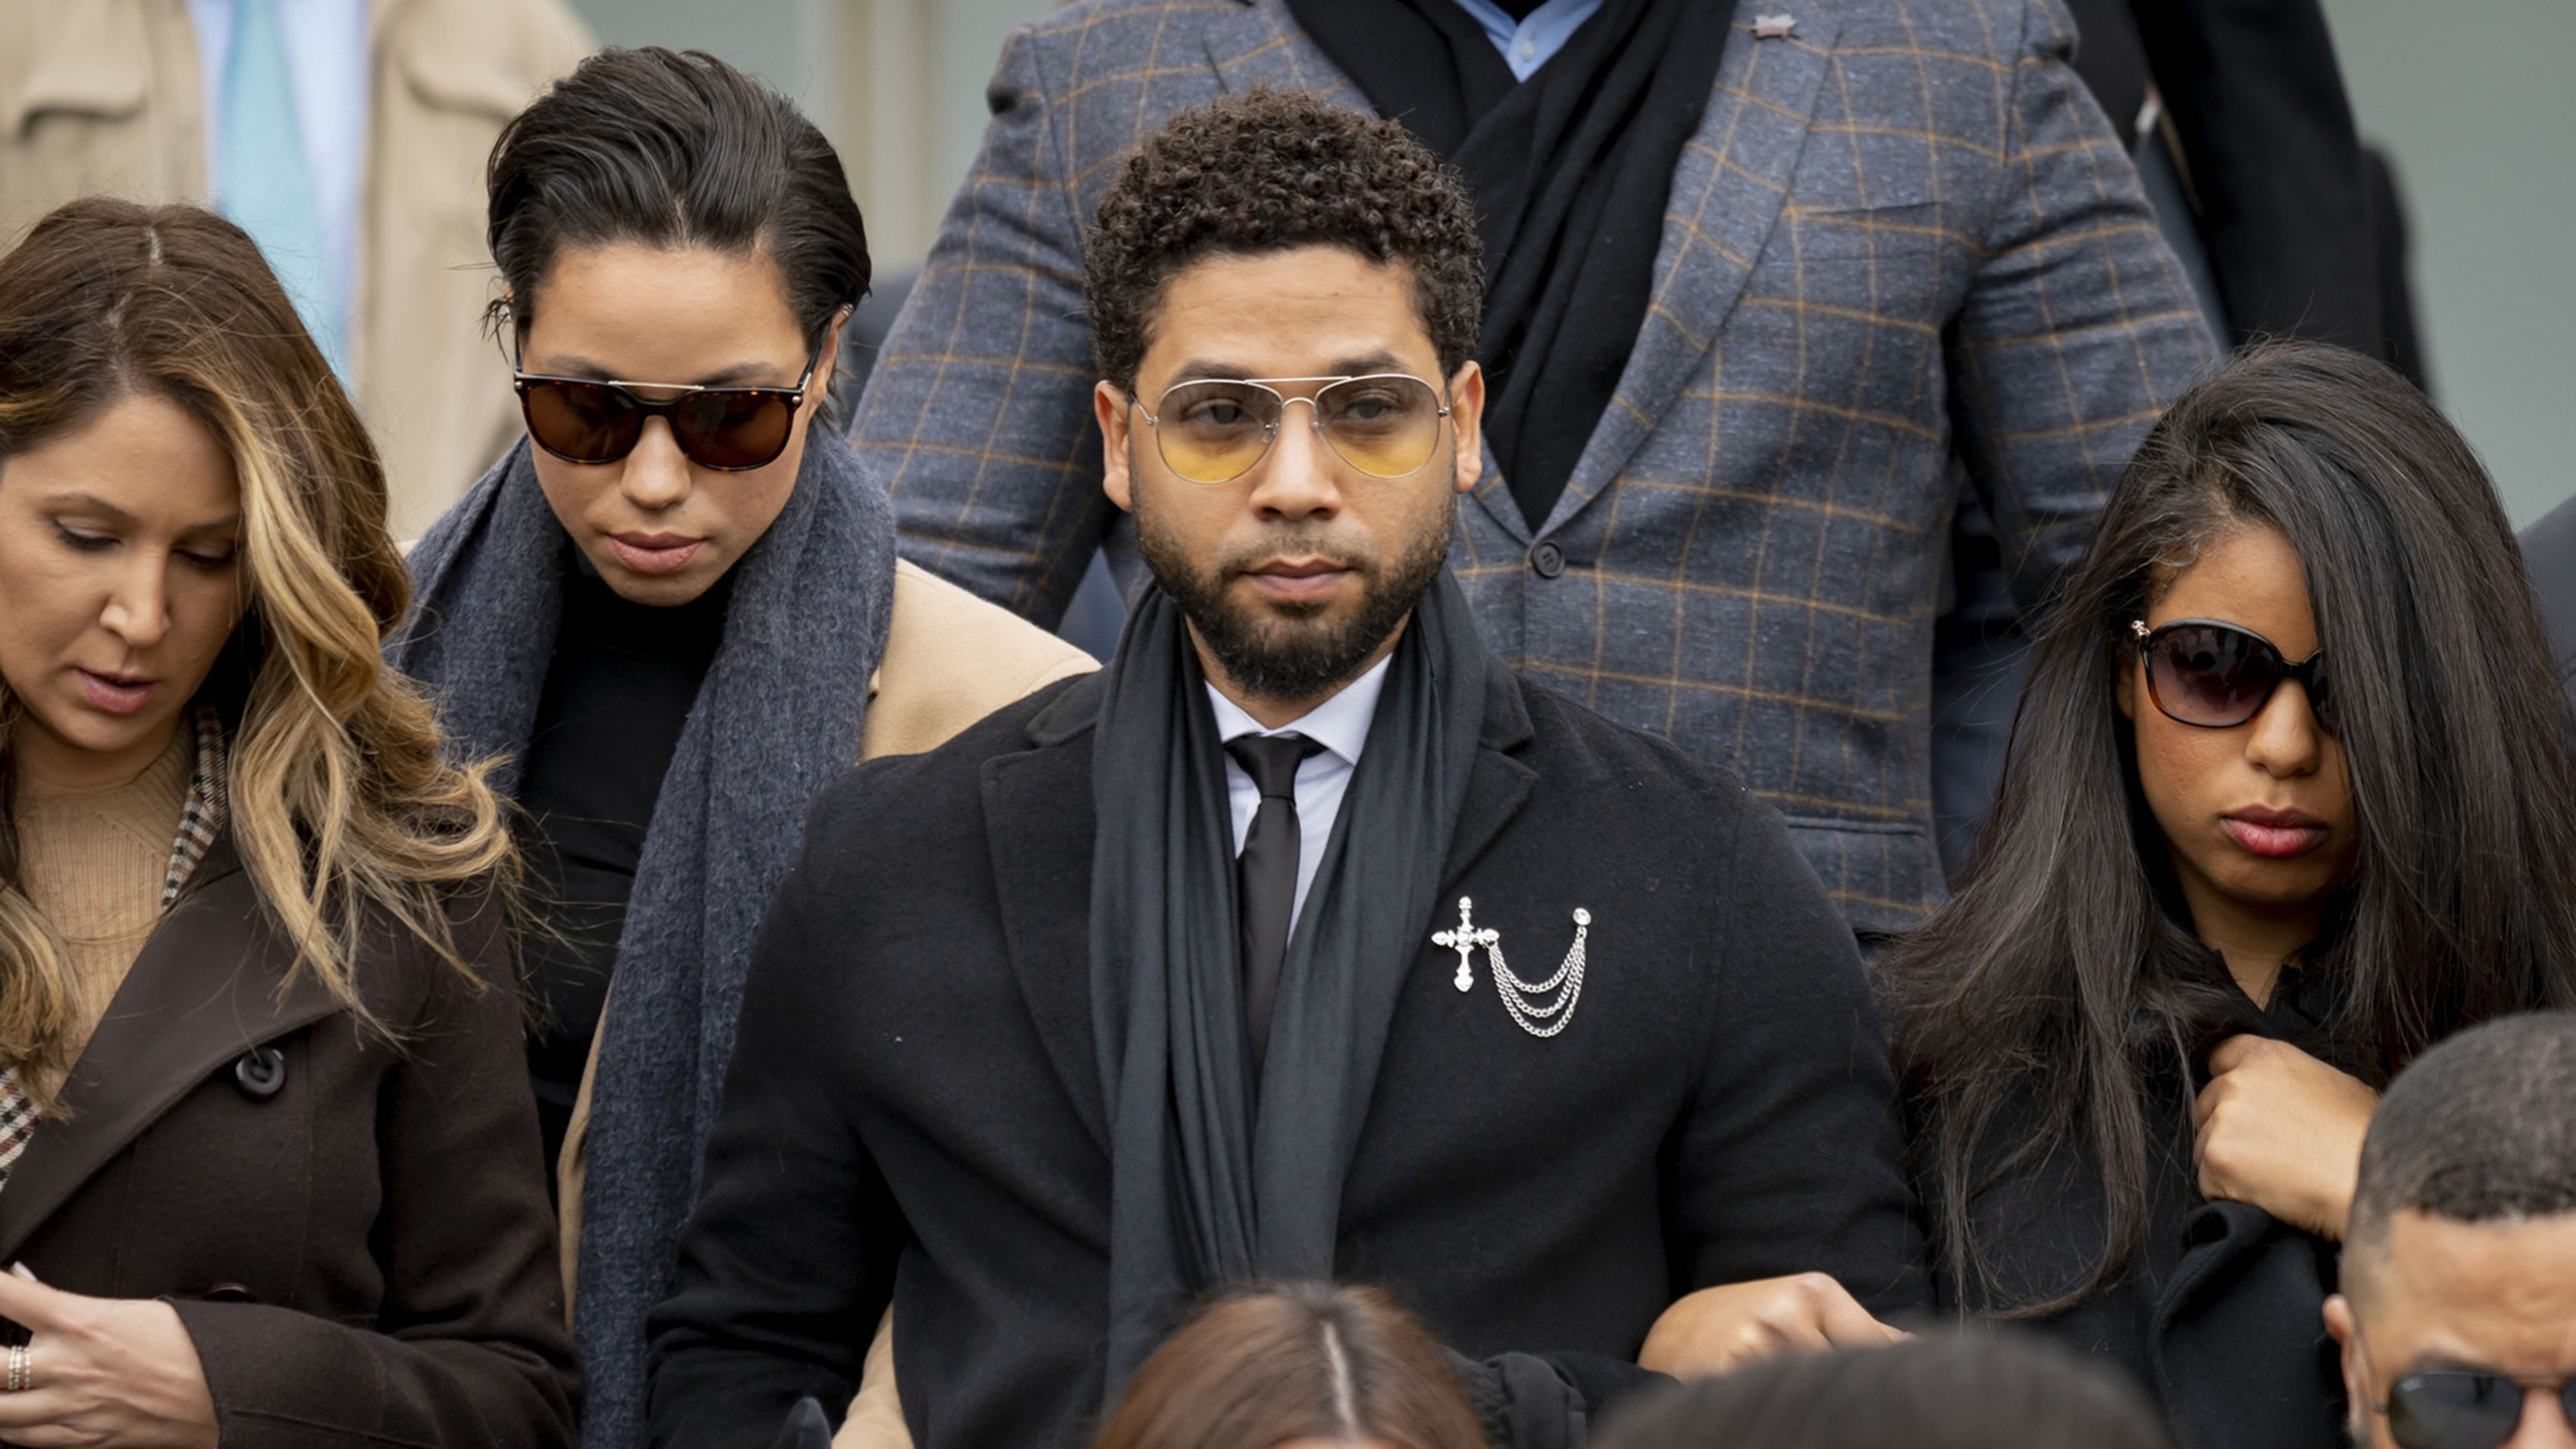 Jussie Smollett departs after a court appearance